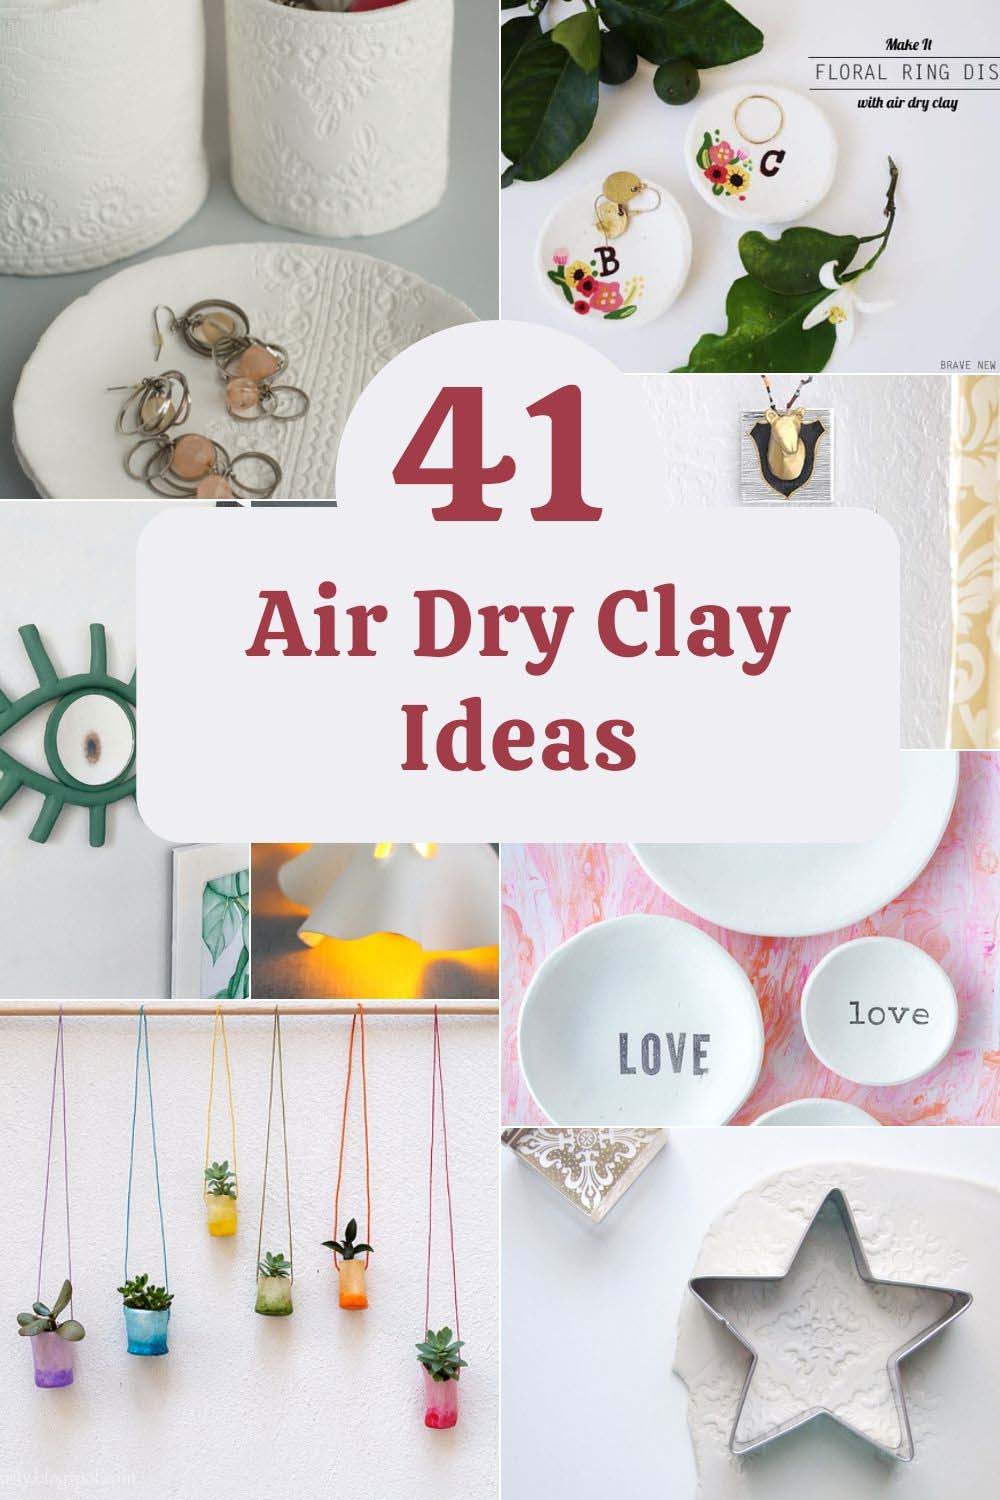 Modeling polymer clay, baking clay or air-dry clay projects for